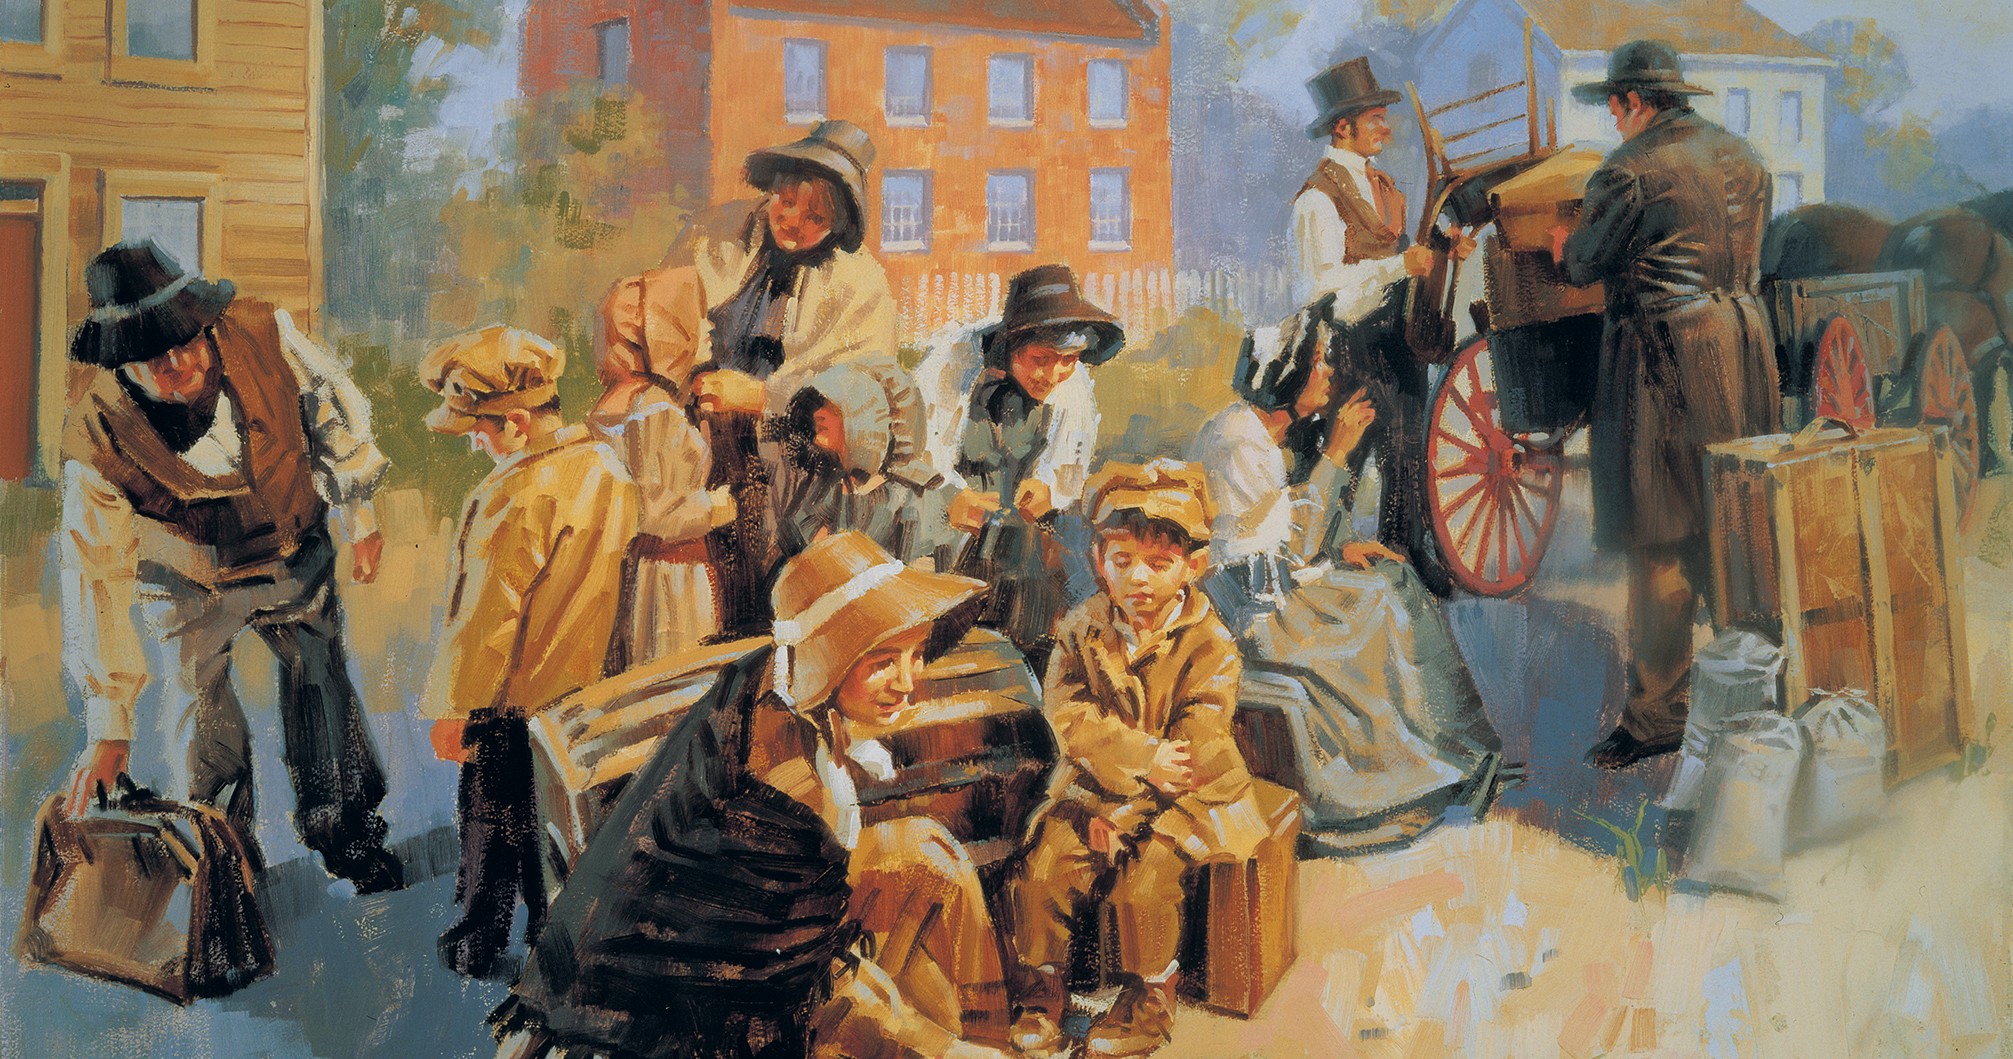 Painting depicts early members gathering possessions and loading wagons as they prepare to move to Kirtland.